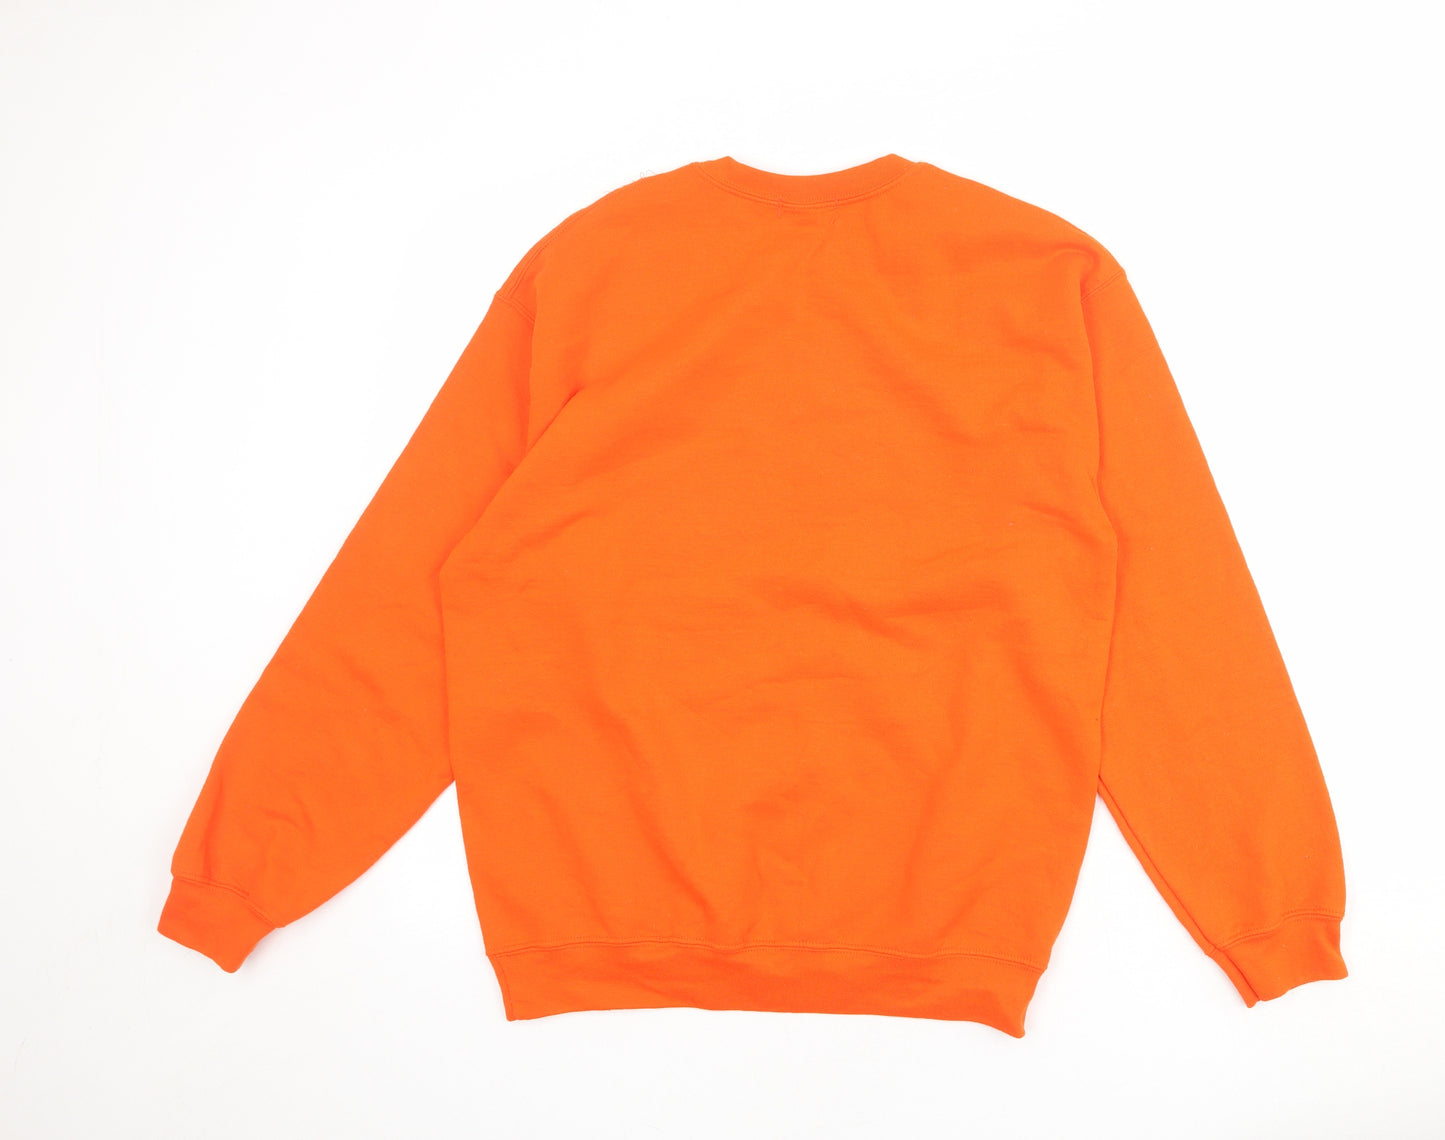 PRETTYLITTLETHING Womens Orange Polyester Pullover Sweatshirt Size S Pullover - Super League